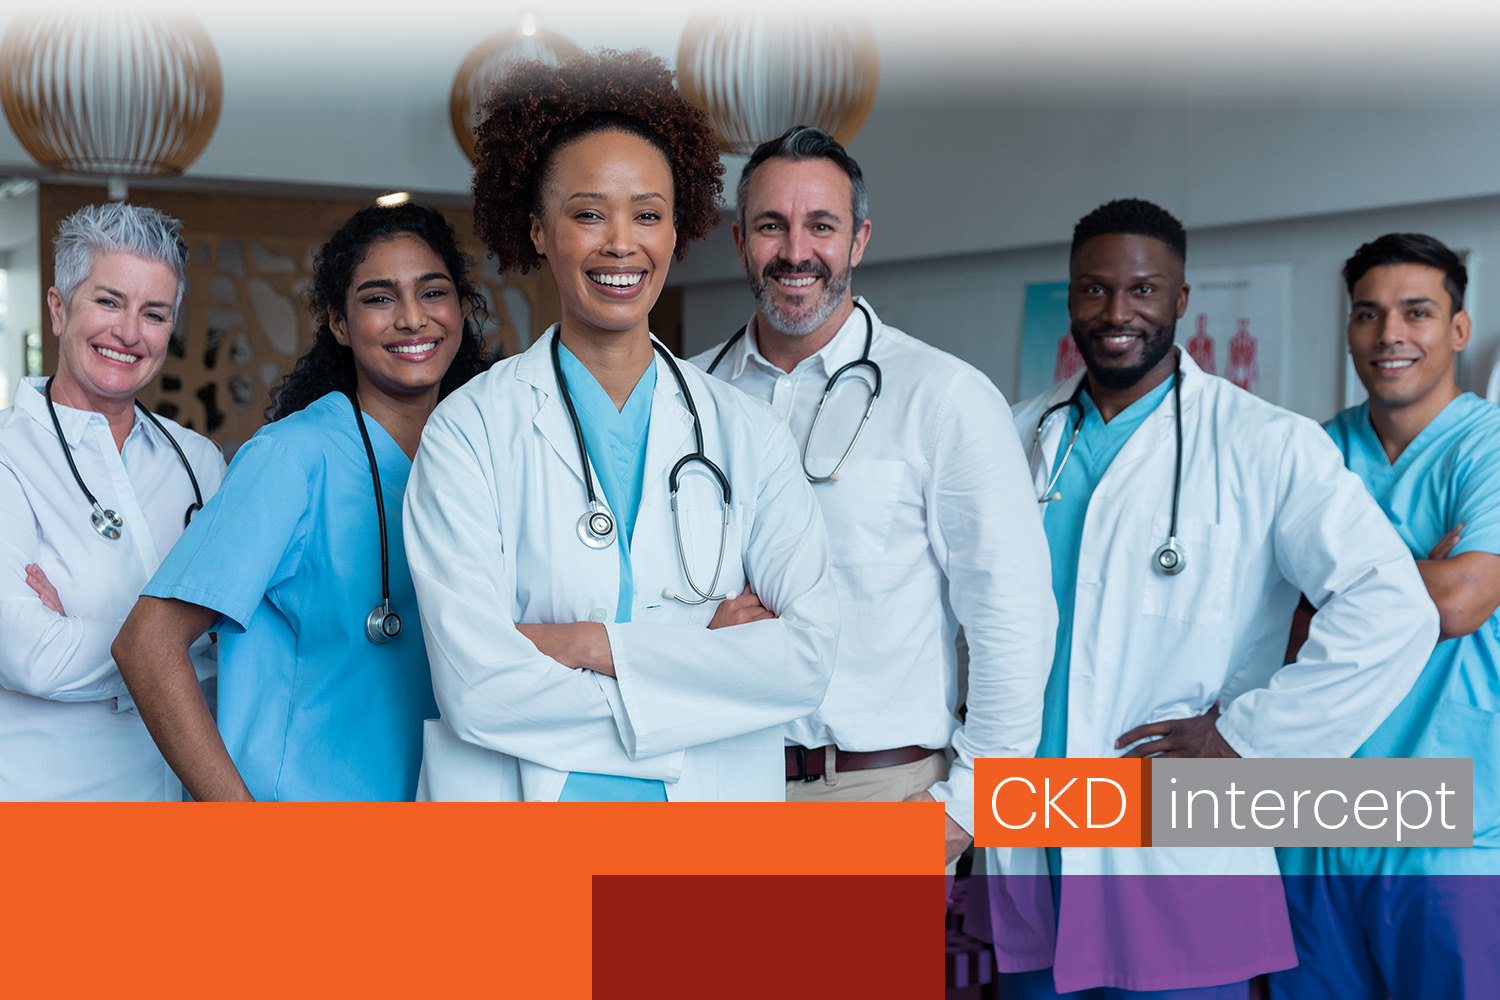 care team smiling and looking at camera, with CKD intercept logo